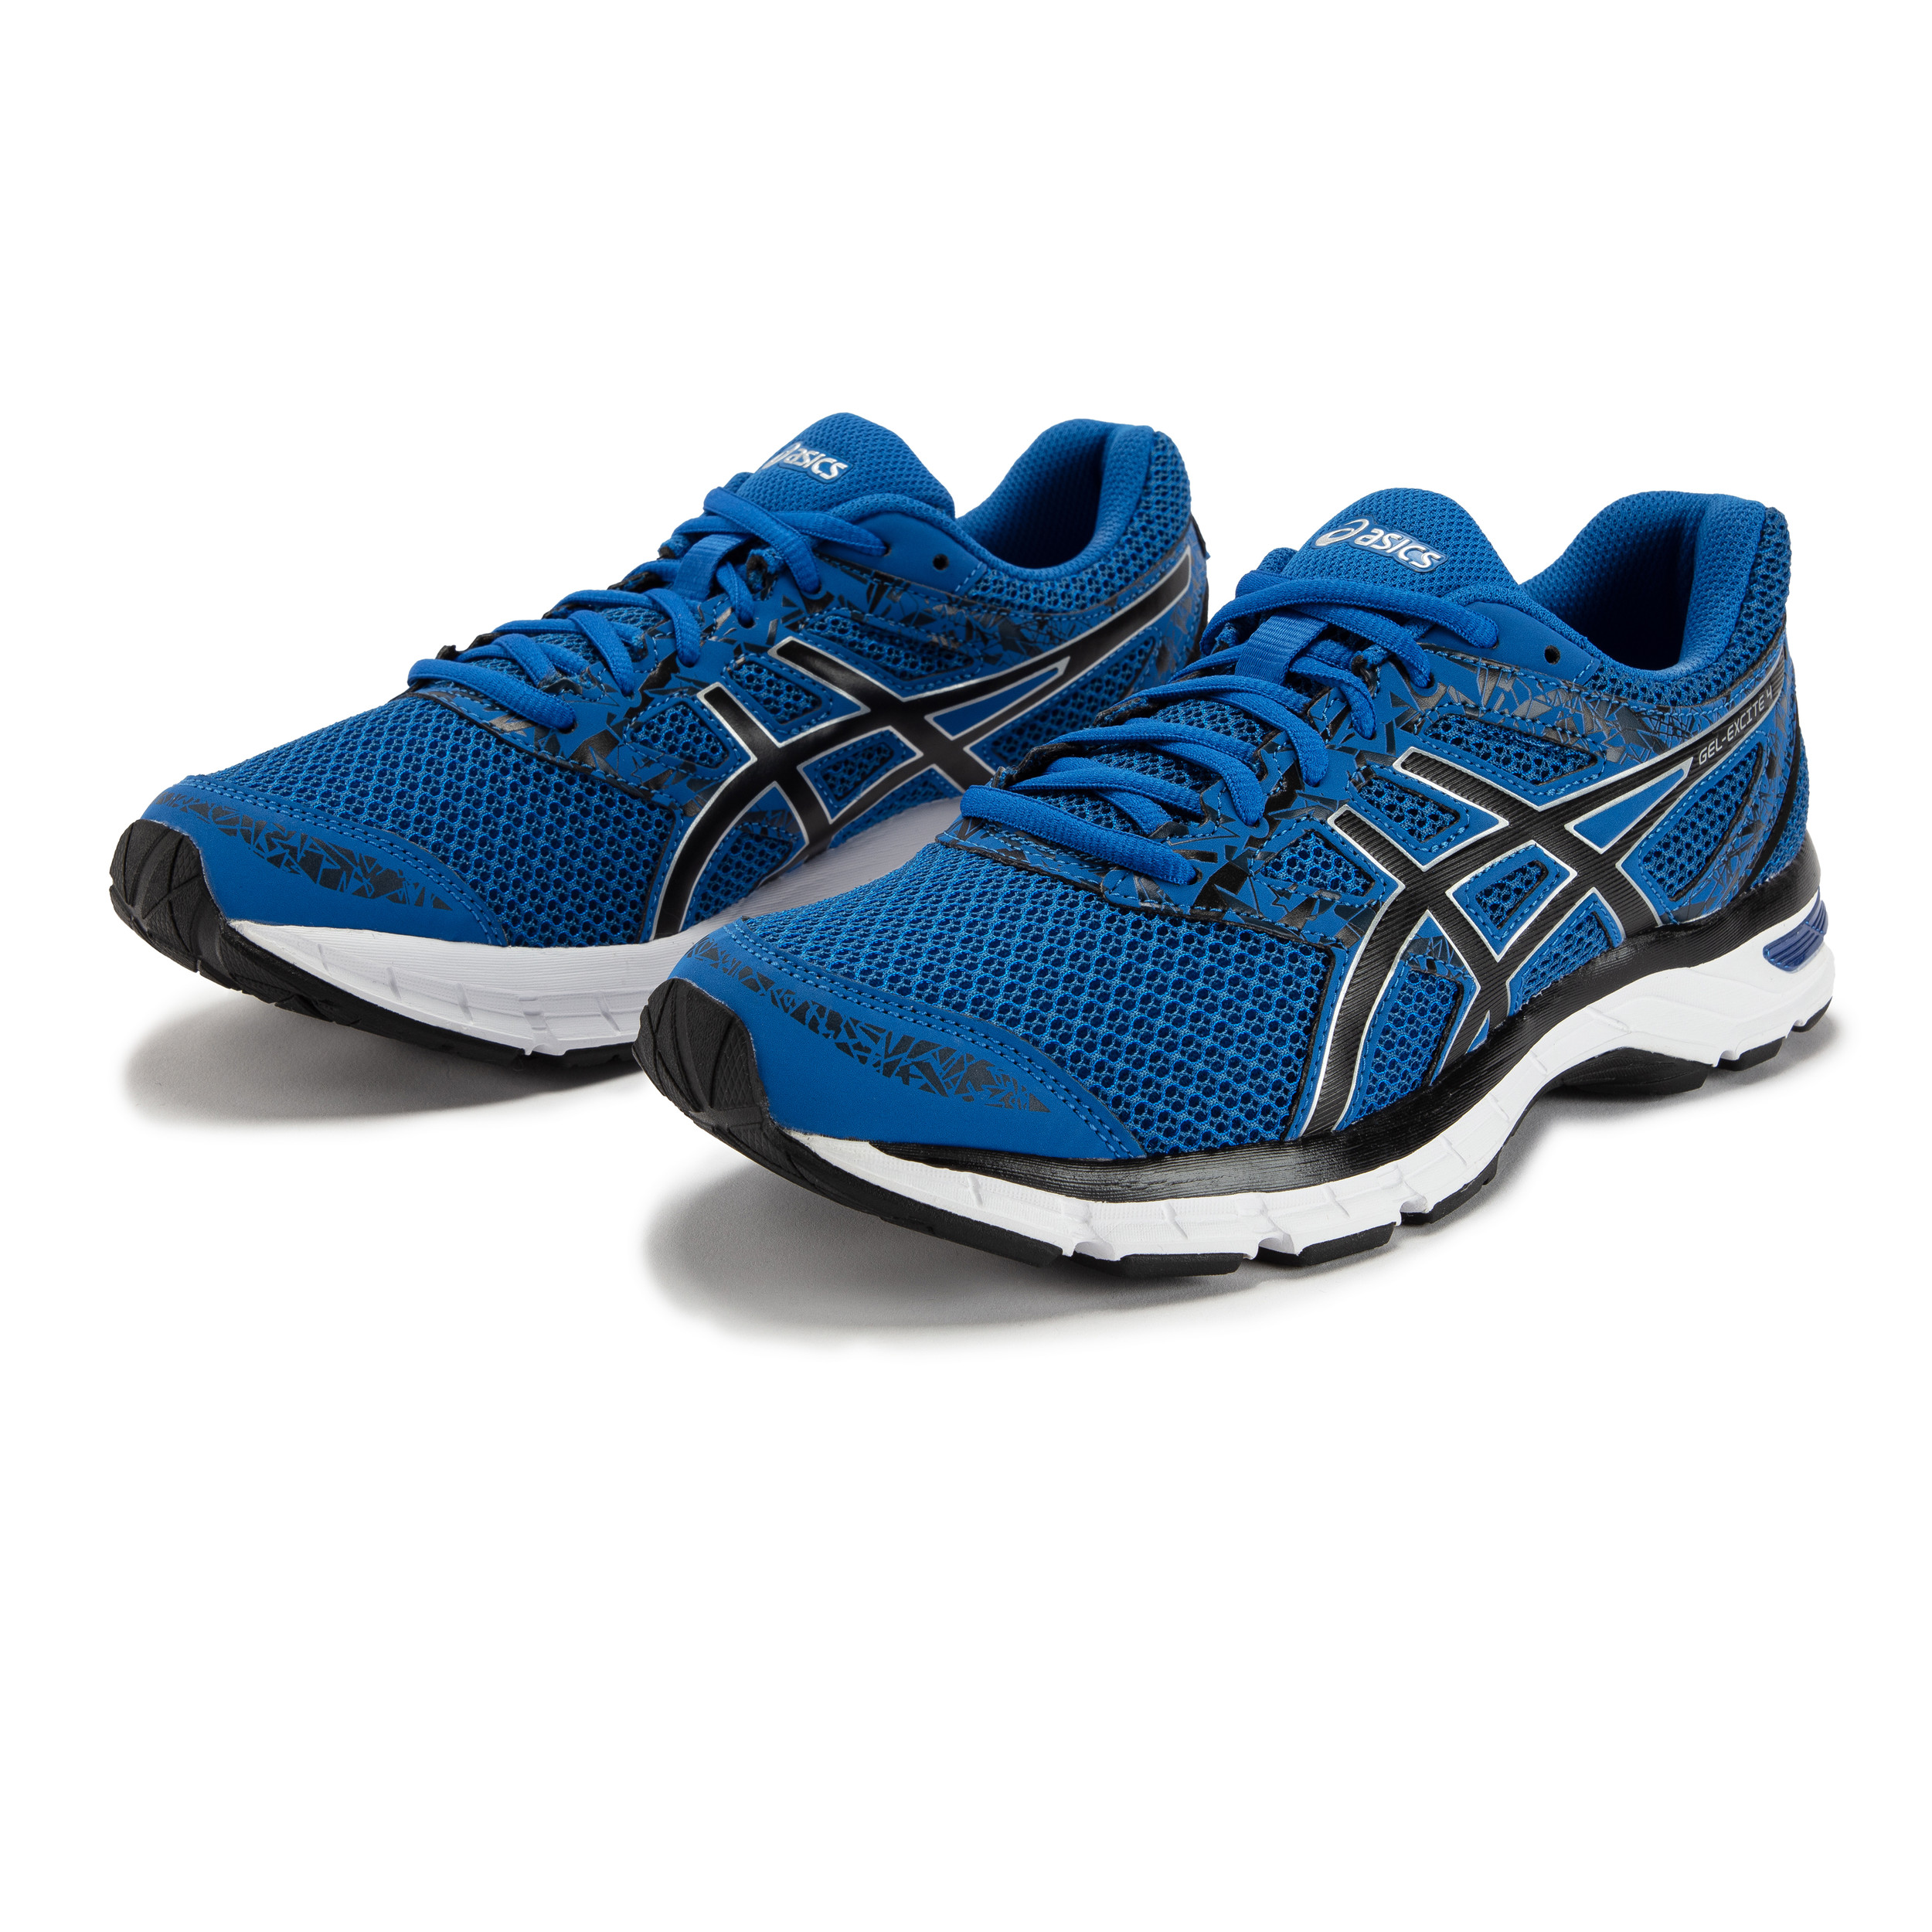 ASICS Gel-Excite 4 Running Shoes